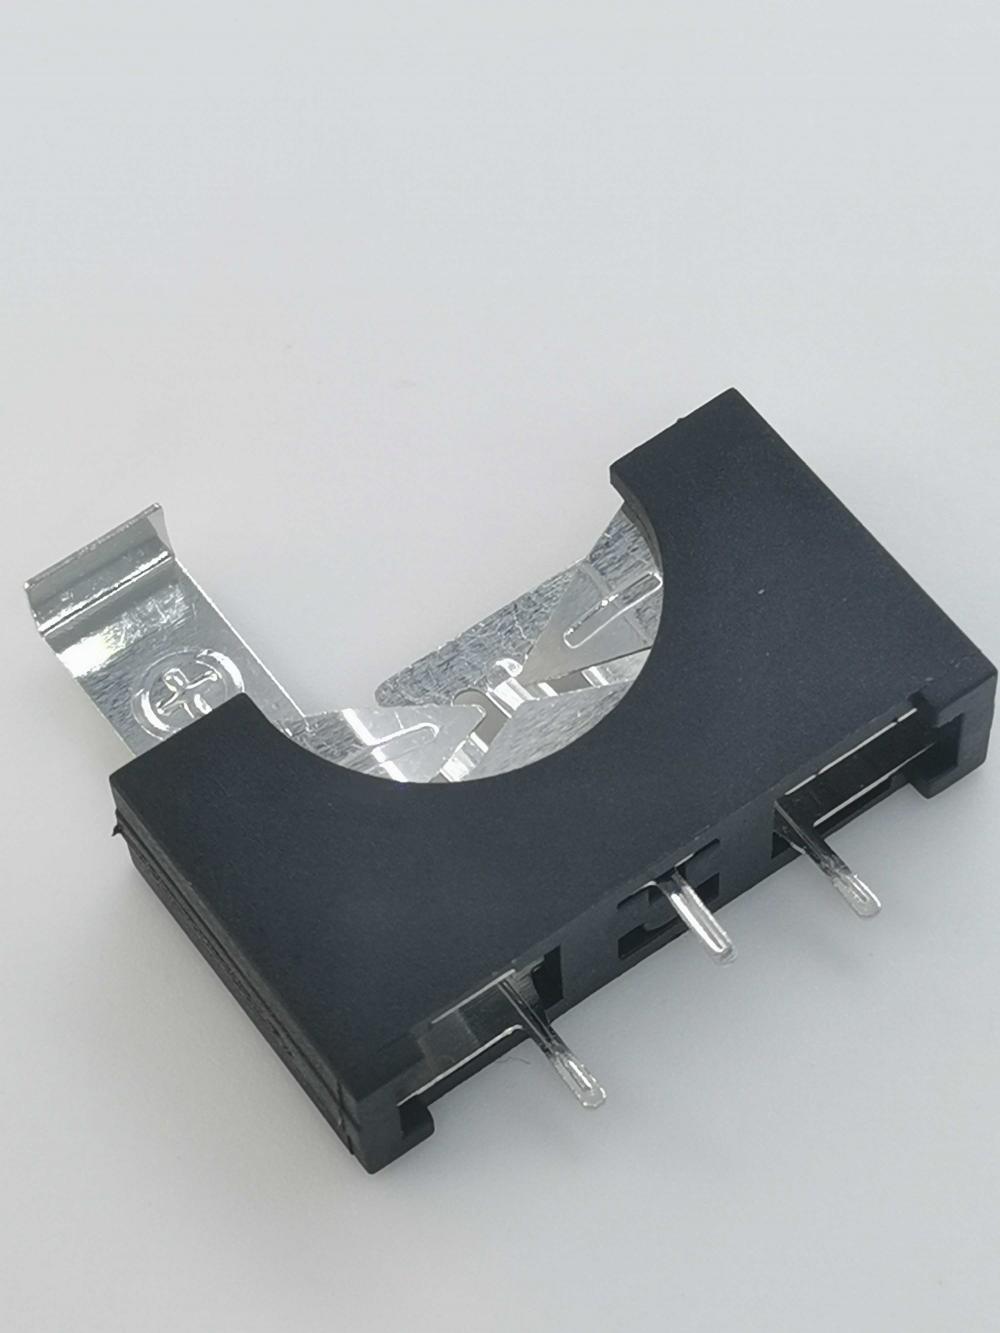 Coin Cell Battery Holders FOR CR2032 THM/DIP